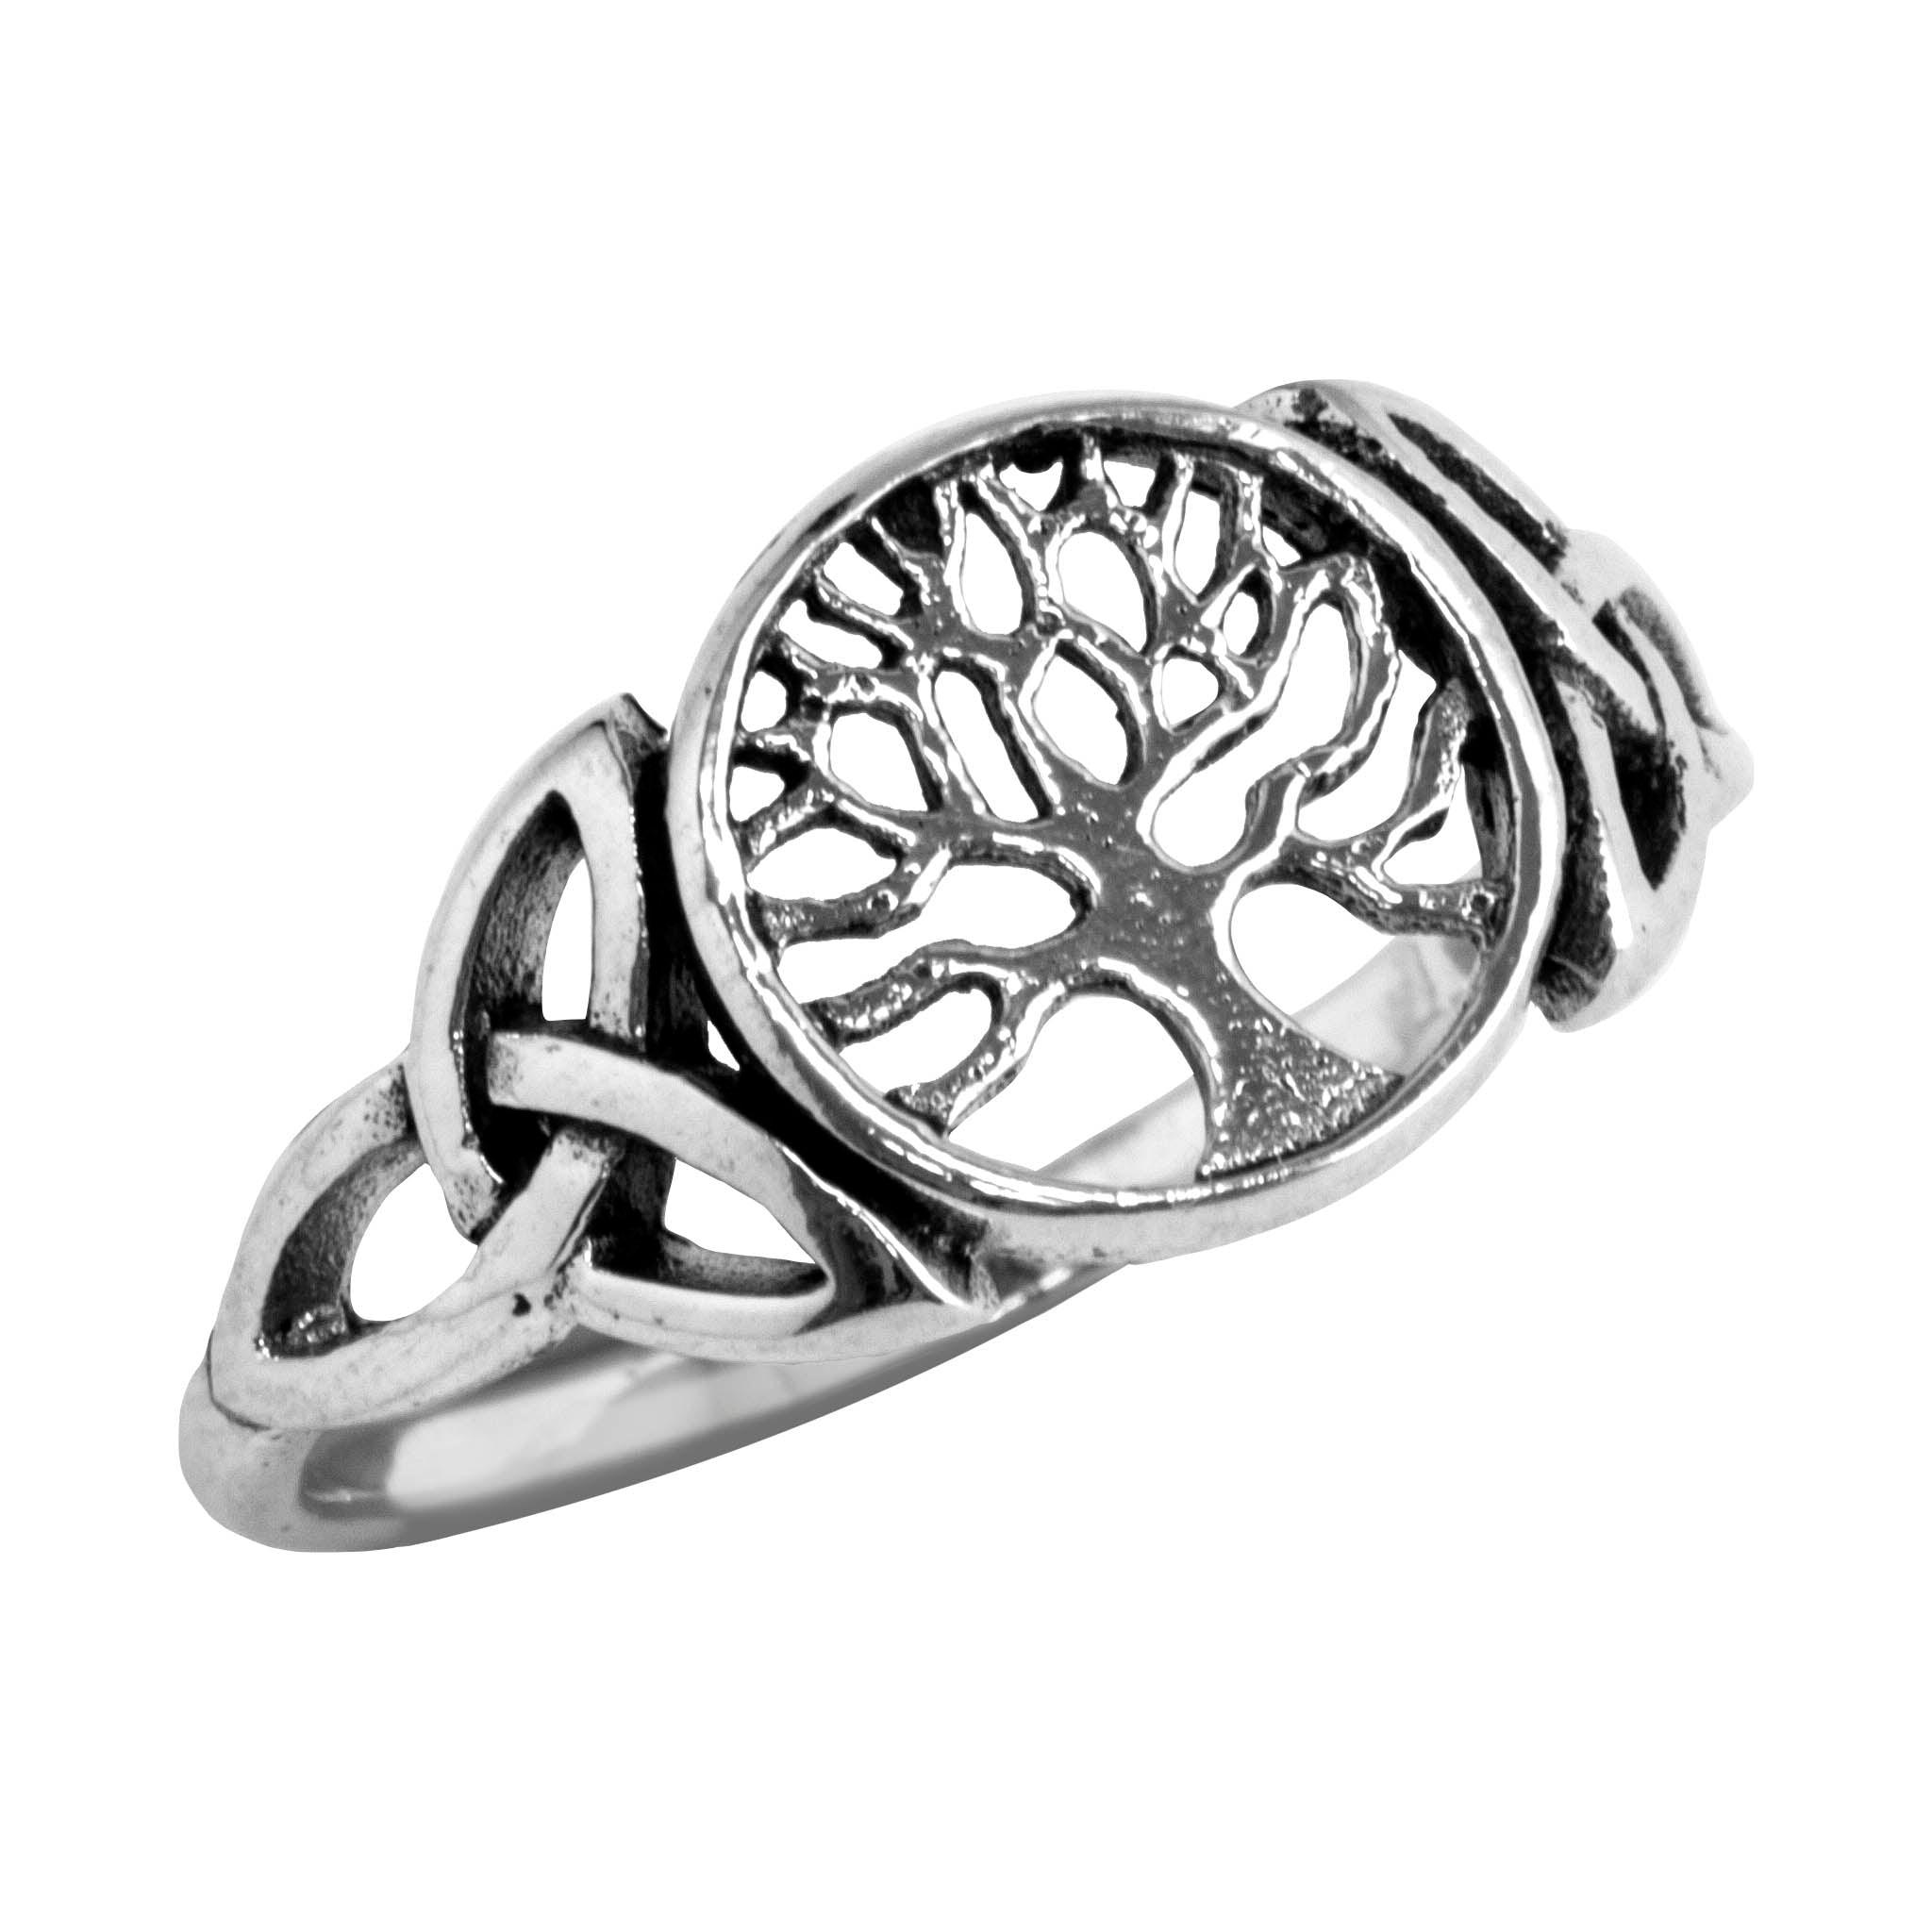 Buy Sterling Silver Tree of Life Ring - Size 7 at Amazon.in